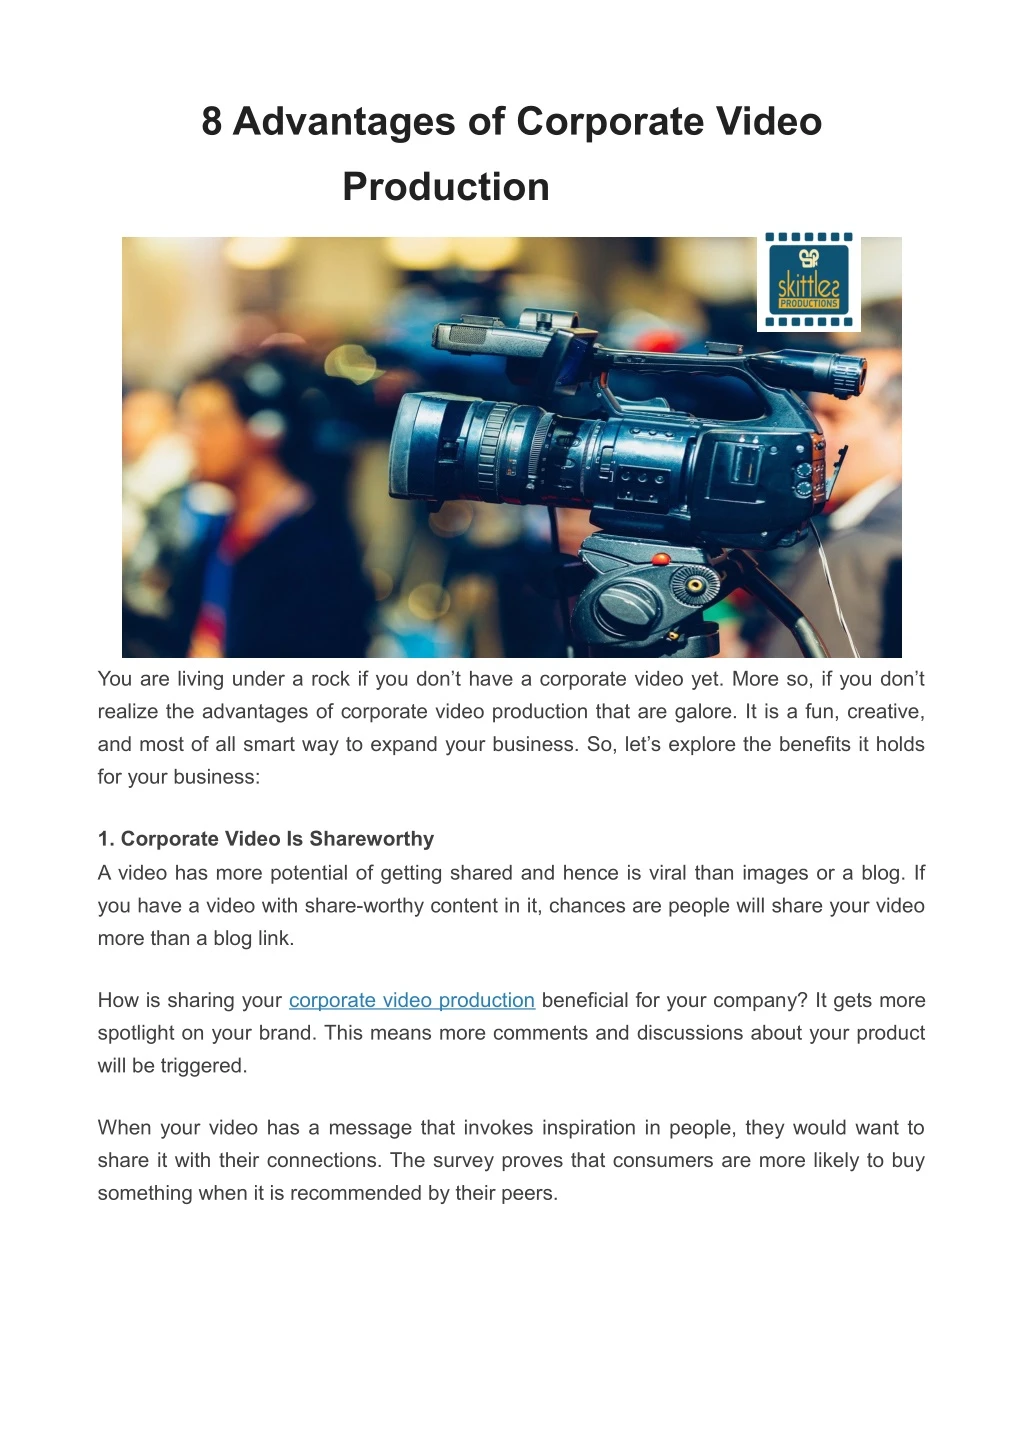 8 advantages of corporate video